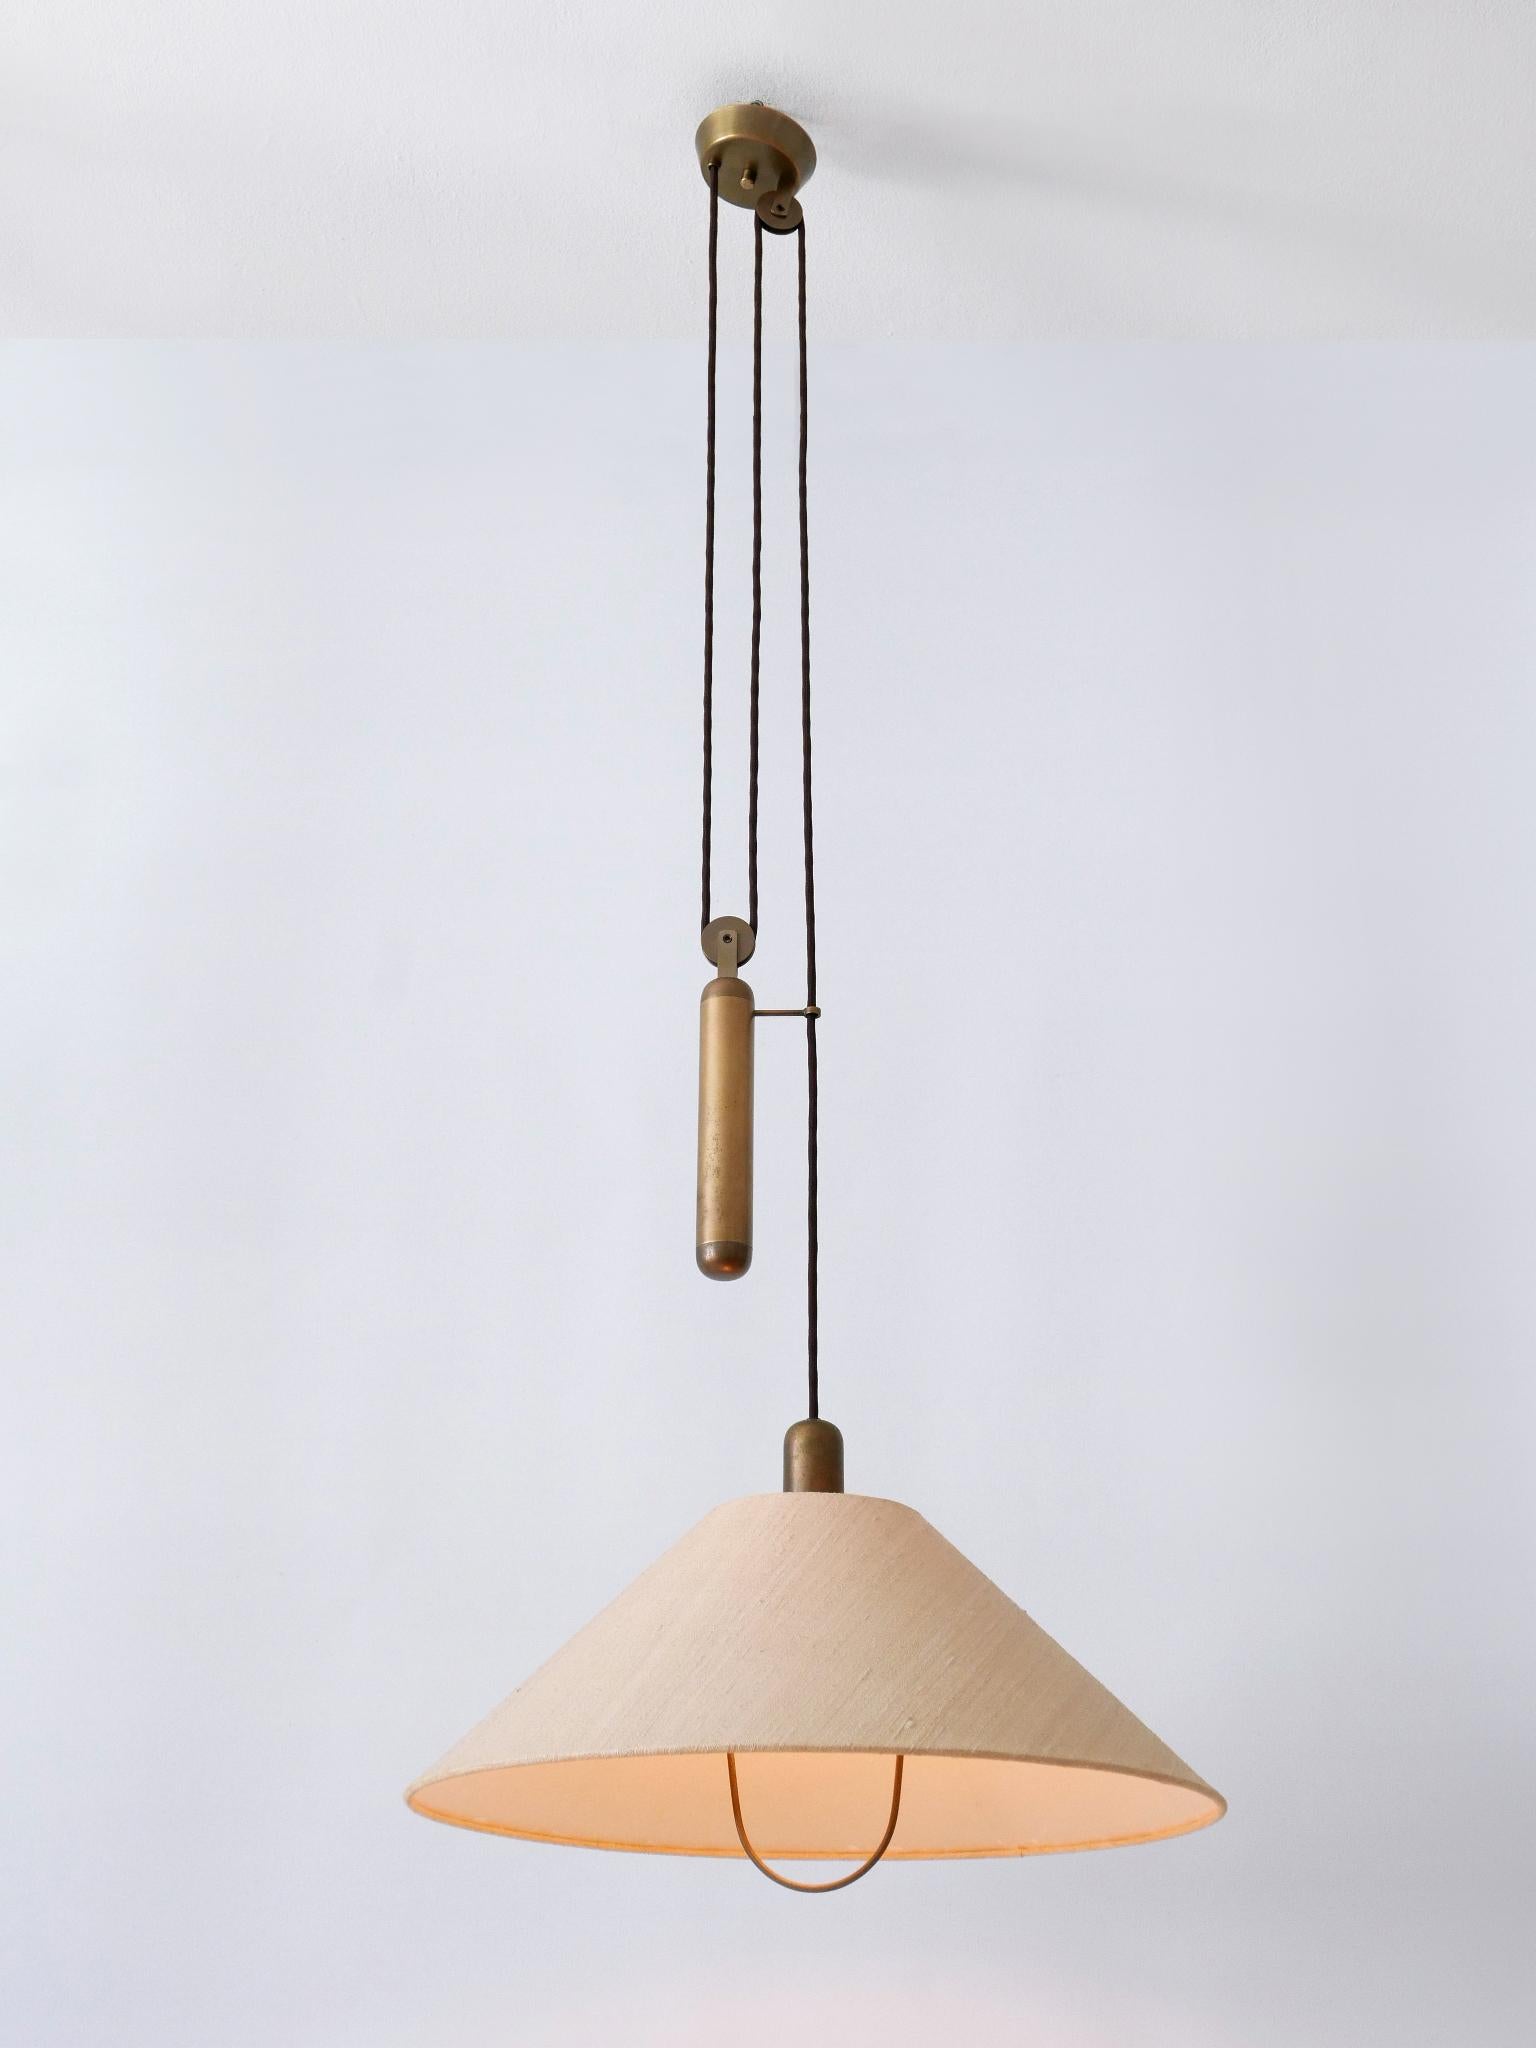 Rare and elegant Mid-Century Modern brass counterweight pendant lamp or hanging light. Designed & manufactured in Germany, 1970s.

Executed in brass and fabric, the lamp comes with 1 x E27 / E26 Edison screw fit bulb socket, is wired and in working